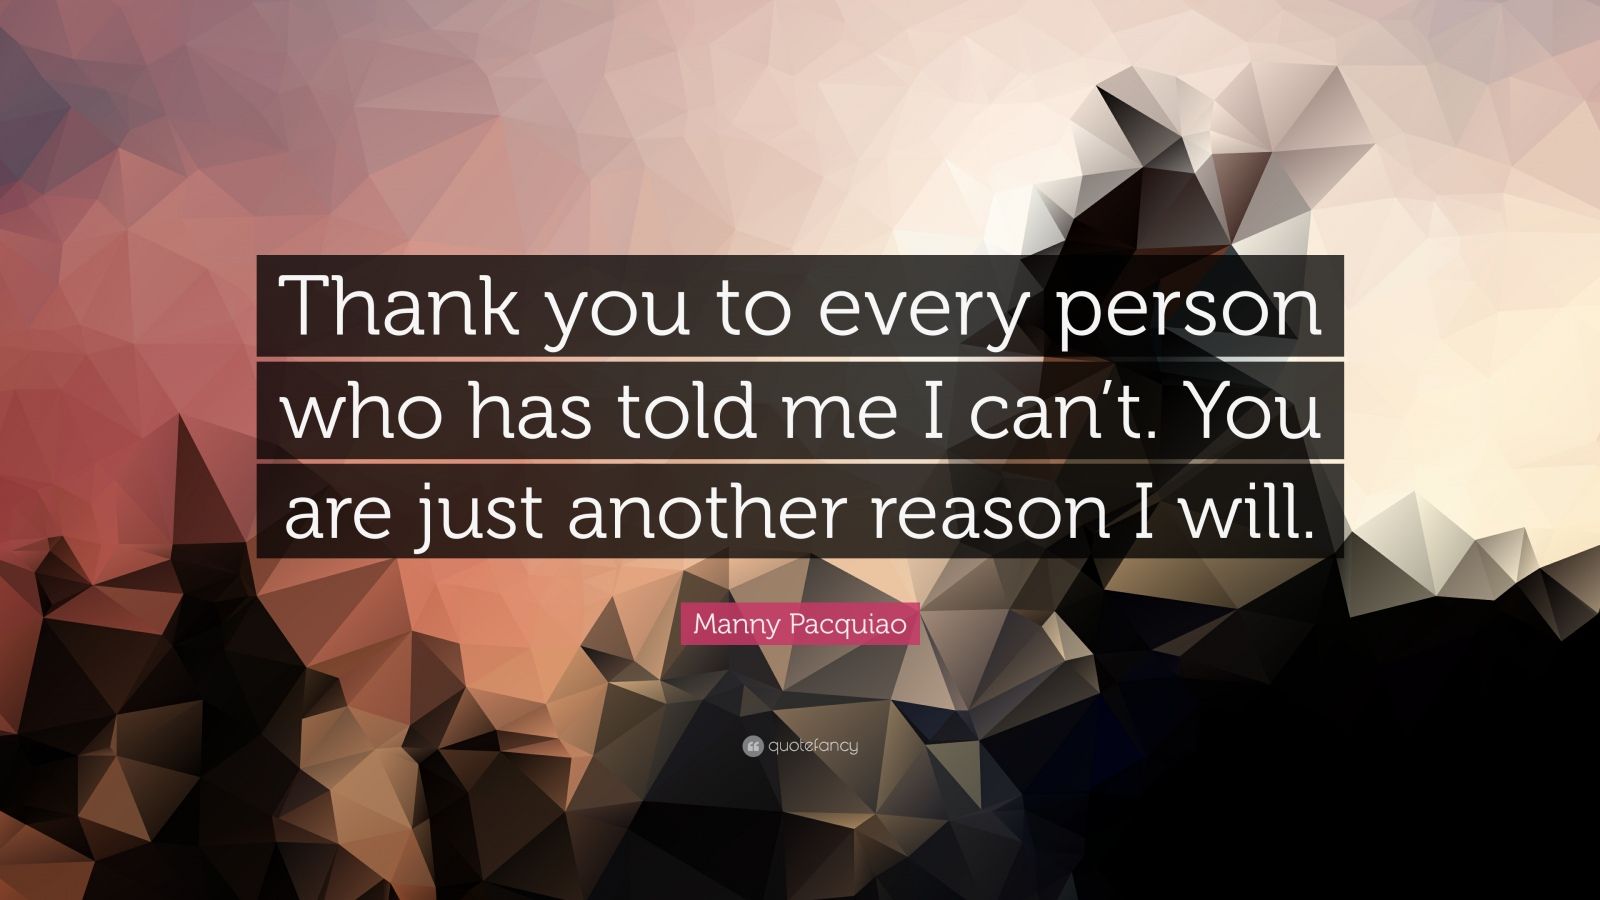 Manny Pacquiao Quote: “Thank you to every person who has told me I can ...